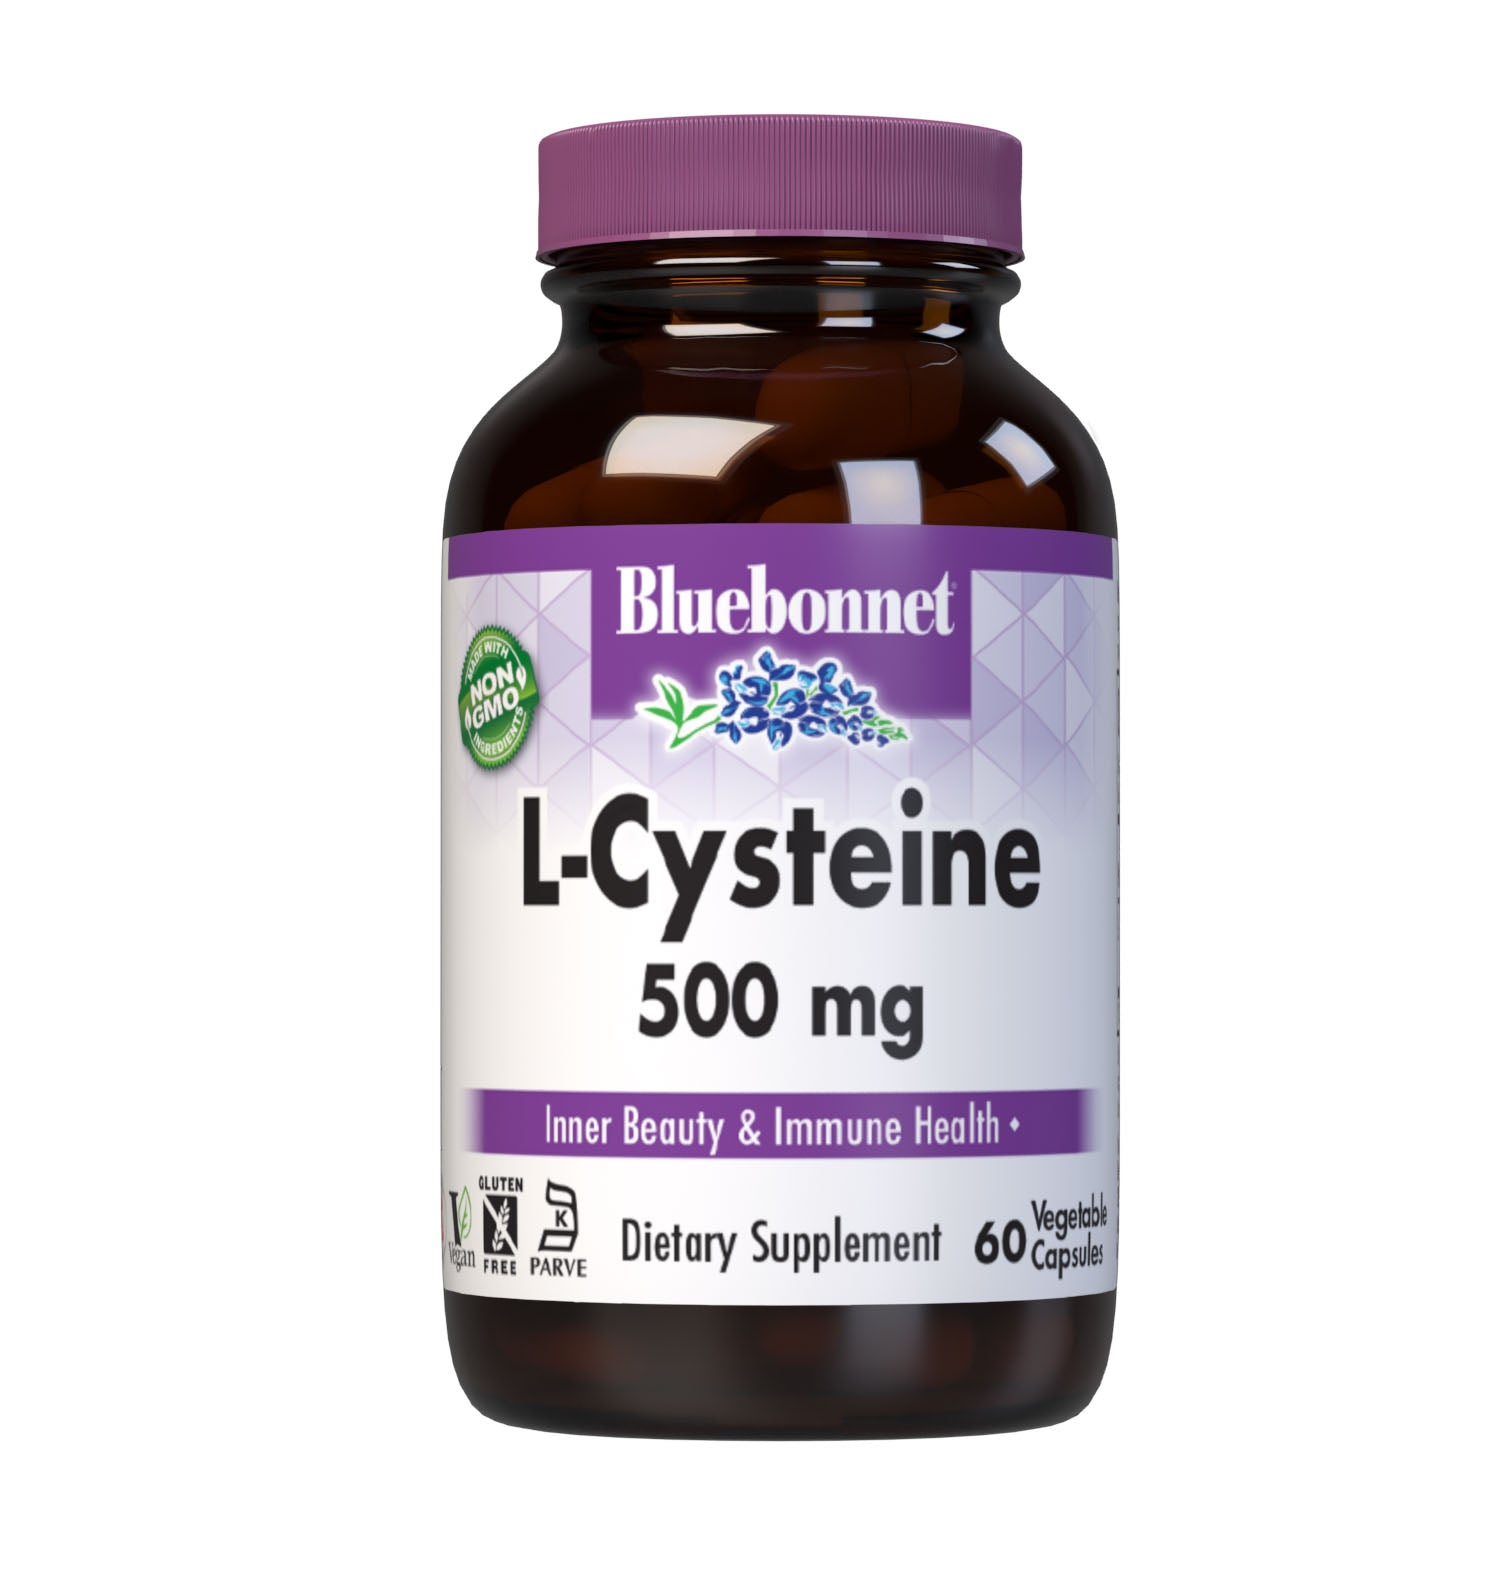 Bluebonnet’s L-Cysteine 500 mg 60 Vegetable Capsules are formulated with the free-form amino acid L-cysteine HCI in its crystalline form from Ajinomoto to support healthy hair, skin and nails. #size_60 count